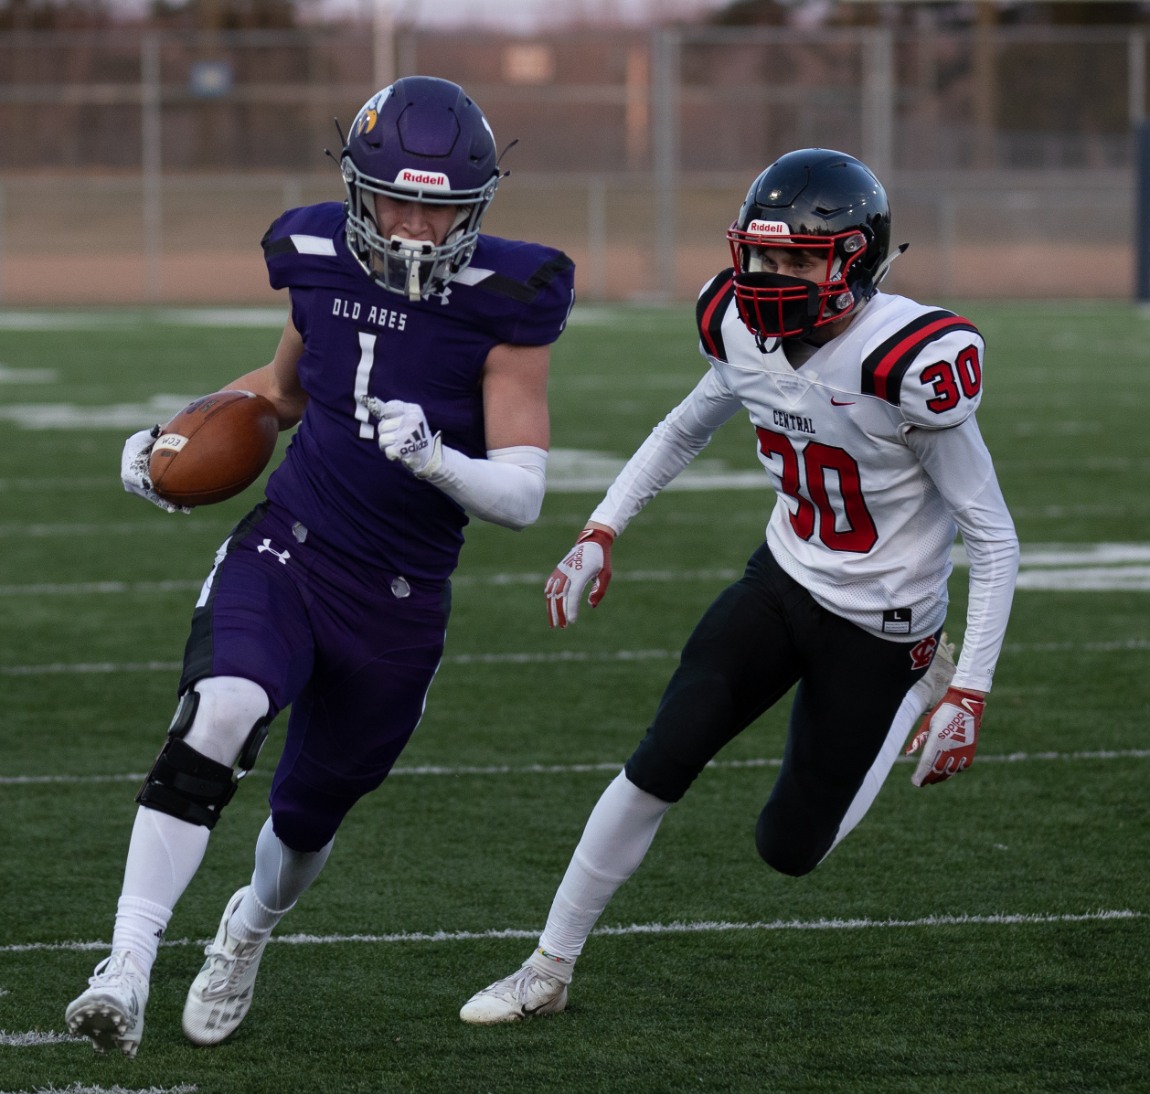 Eau-Claire-Memorial-JV-Football-LaCrosse-Central-at-Home-3-29-21-1571